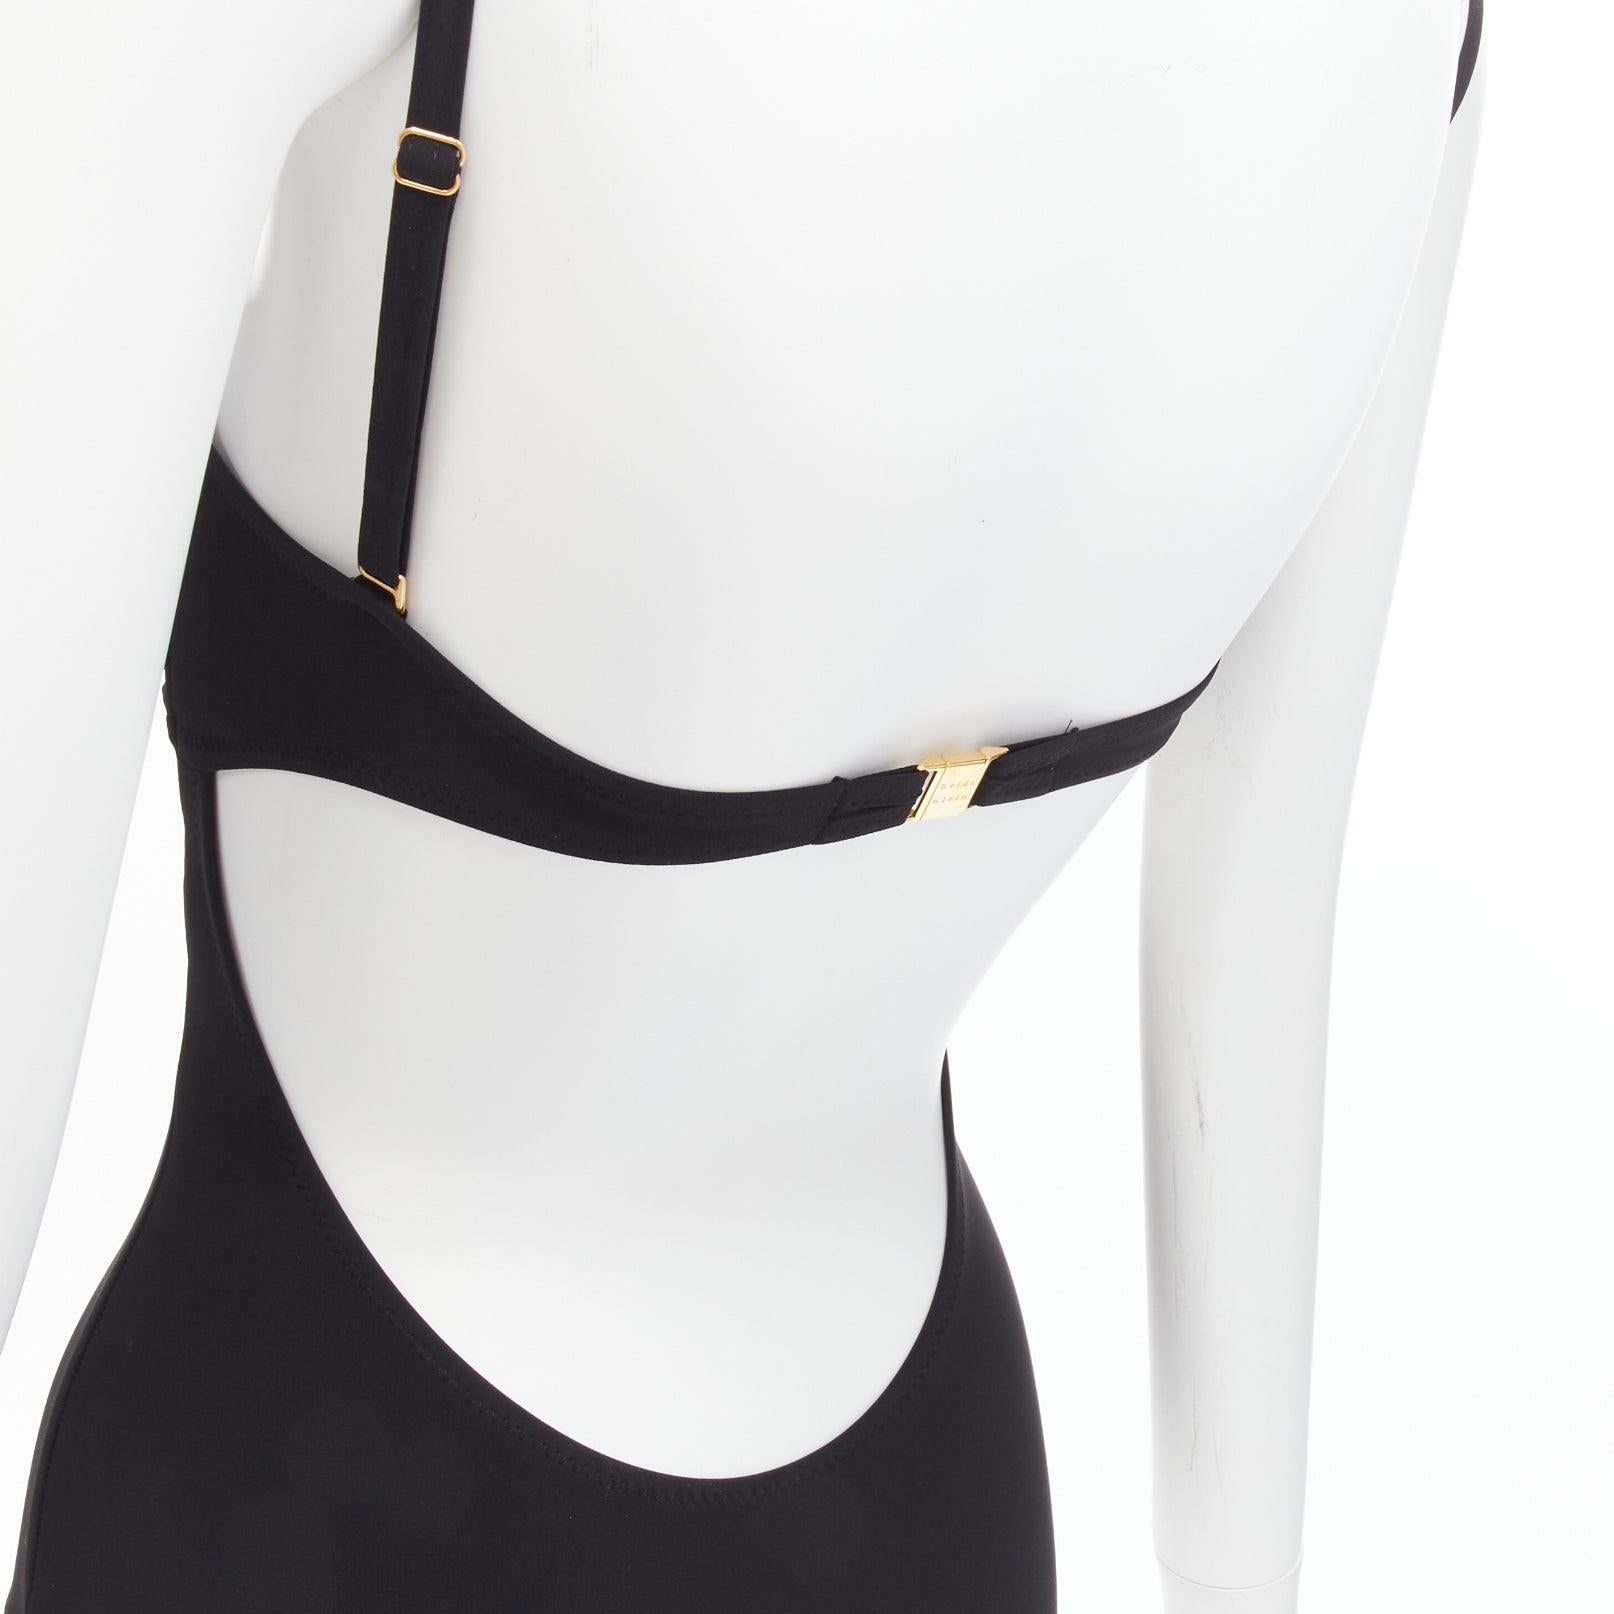 HEIDI KLEIN black gold logo clasp backless flutter bust one piece swimsuit US0 XS
Reference: SNKO/A00366
Brand: Heidi Klein
Material: Polyamide, Elastane
Color: Black
Pattern: Solid
Closure: Clasp
Lining: Black Fabric
Extra Details: Backless. Gold